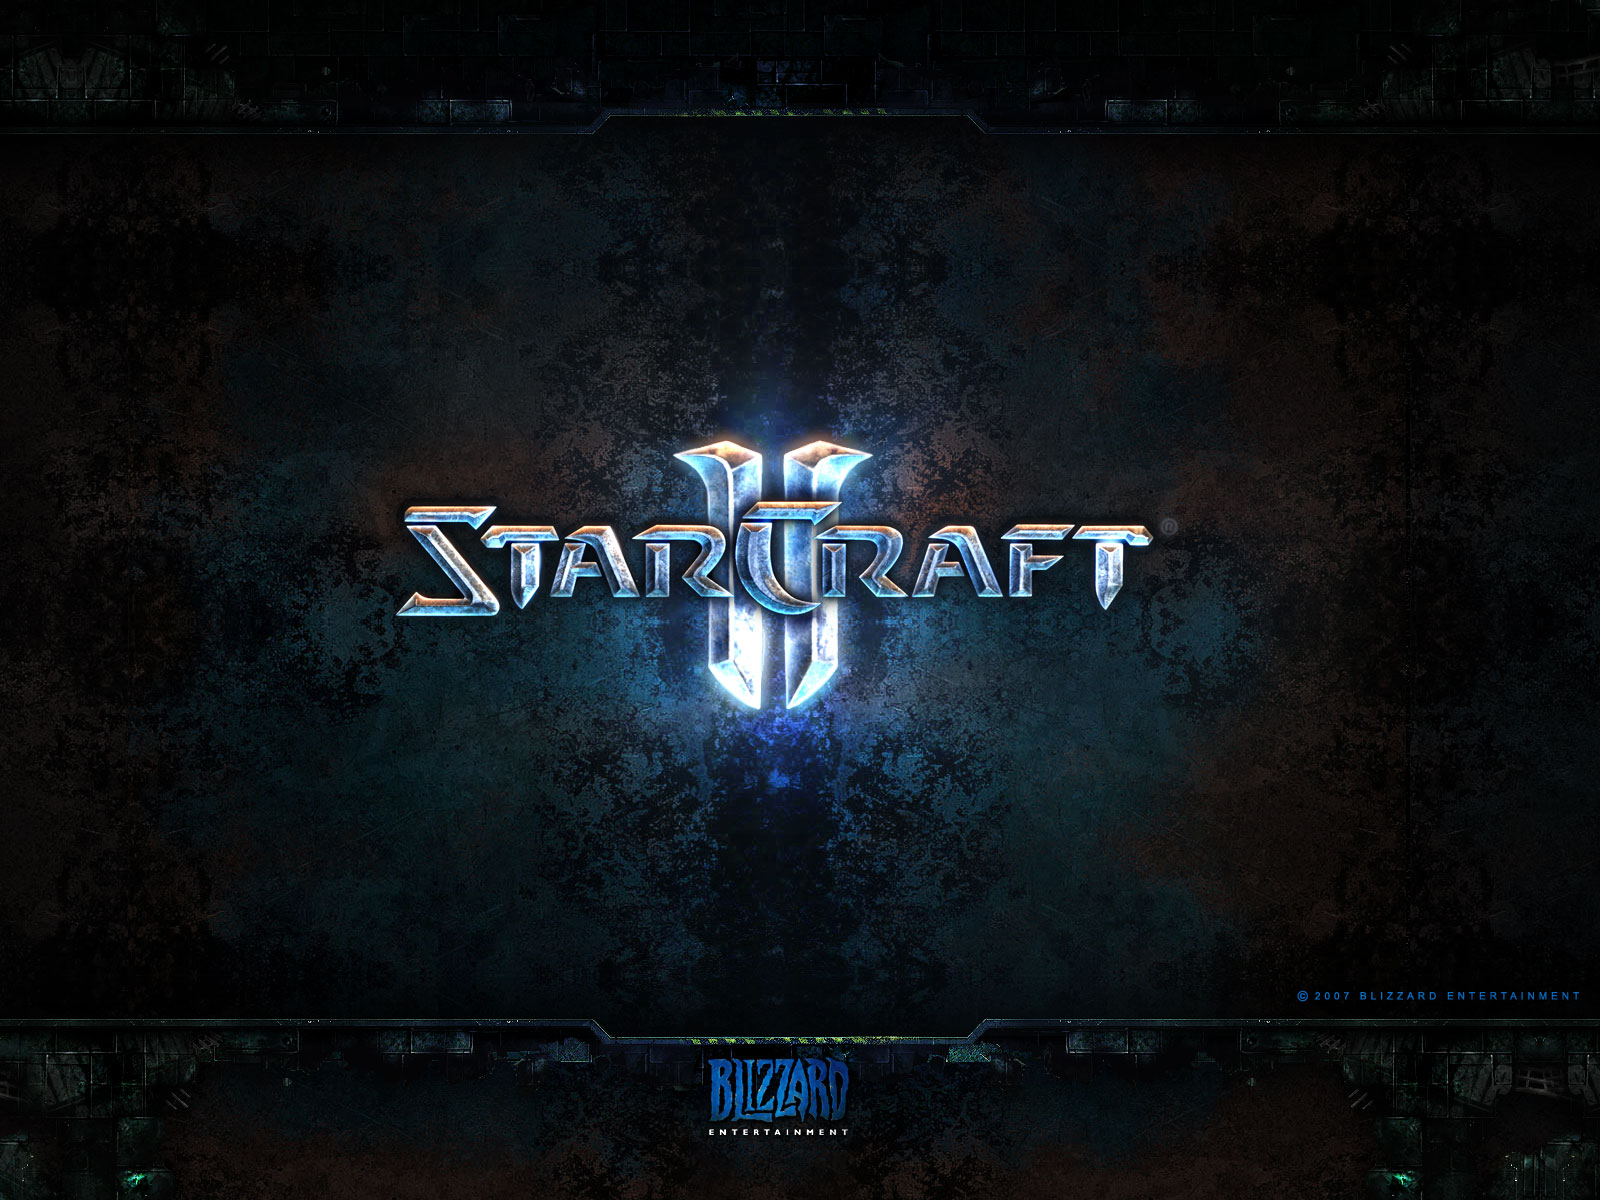 Star craft 2 wallpapers